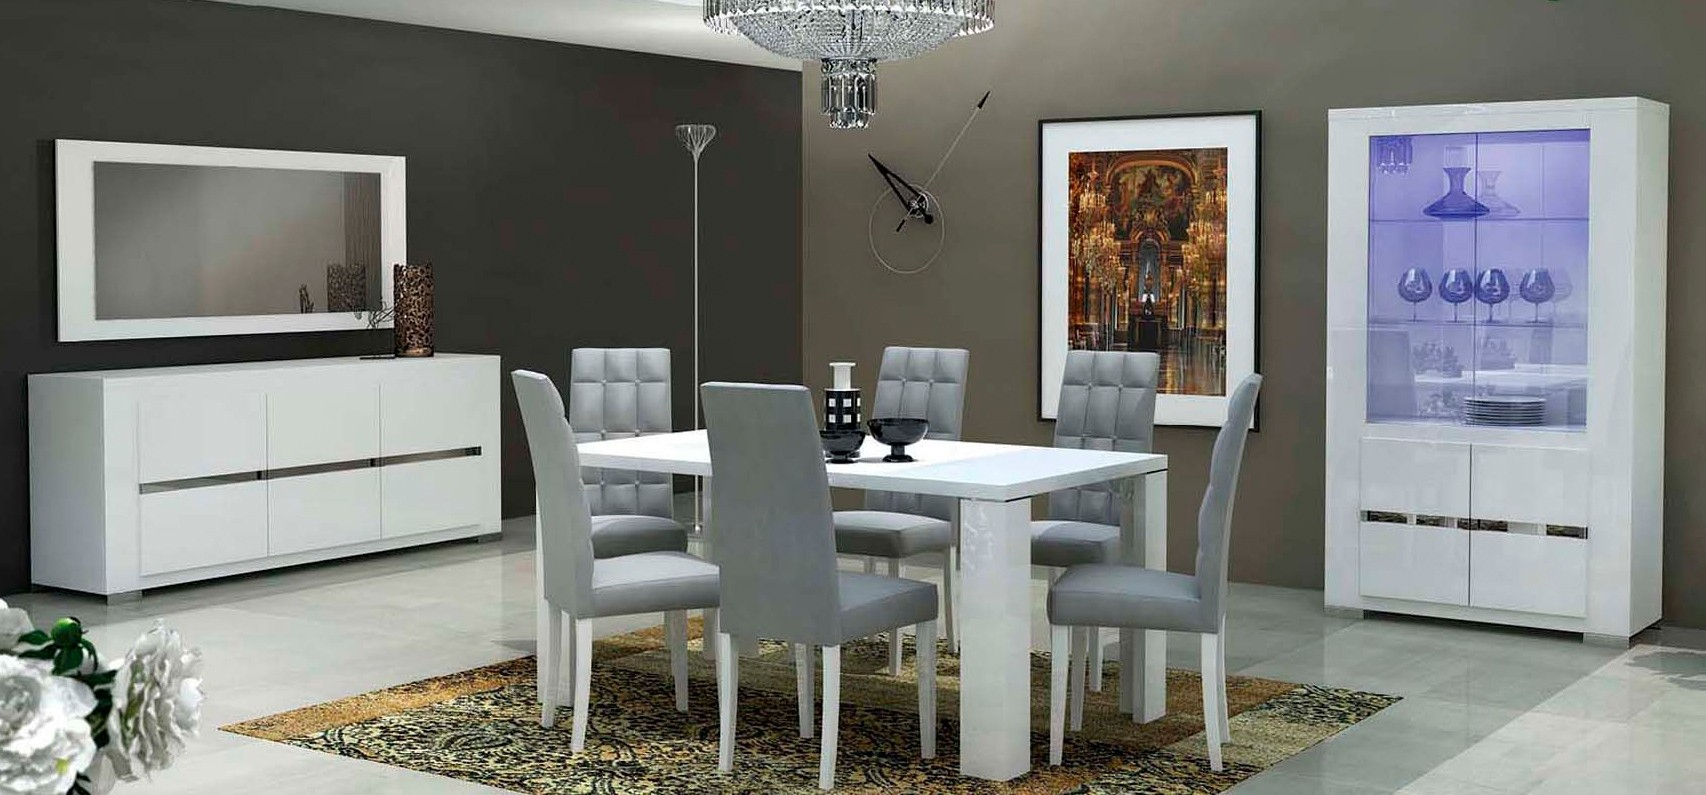 Contemporary Dining Room Sets Images • Faucet Ideas Site